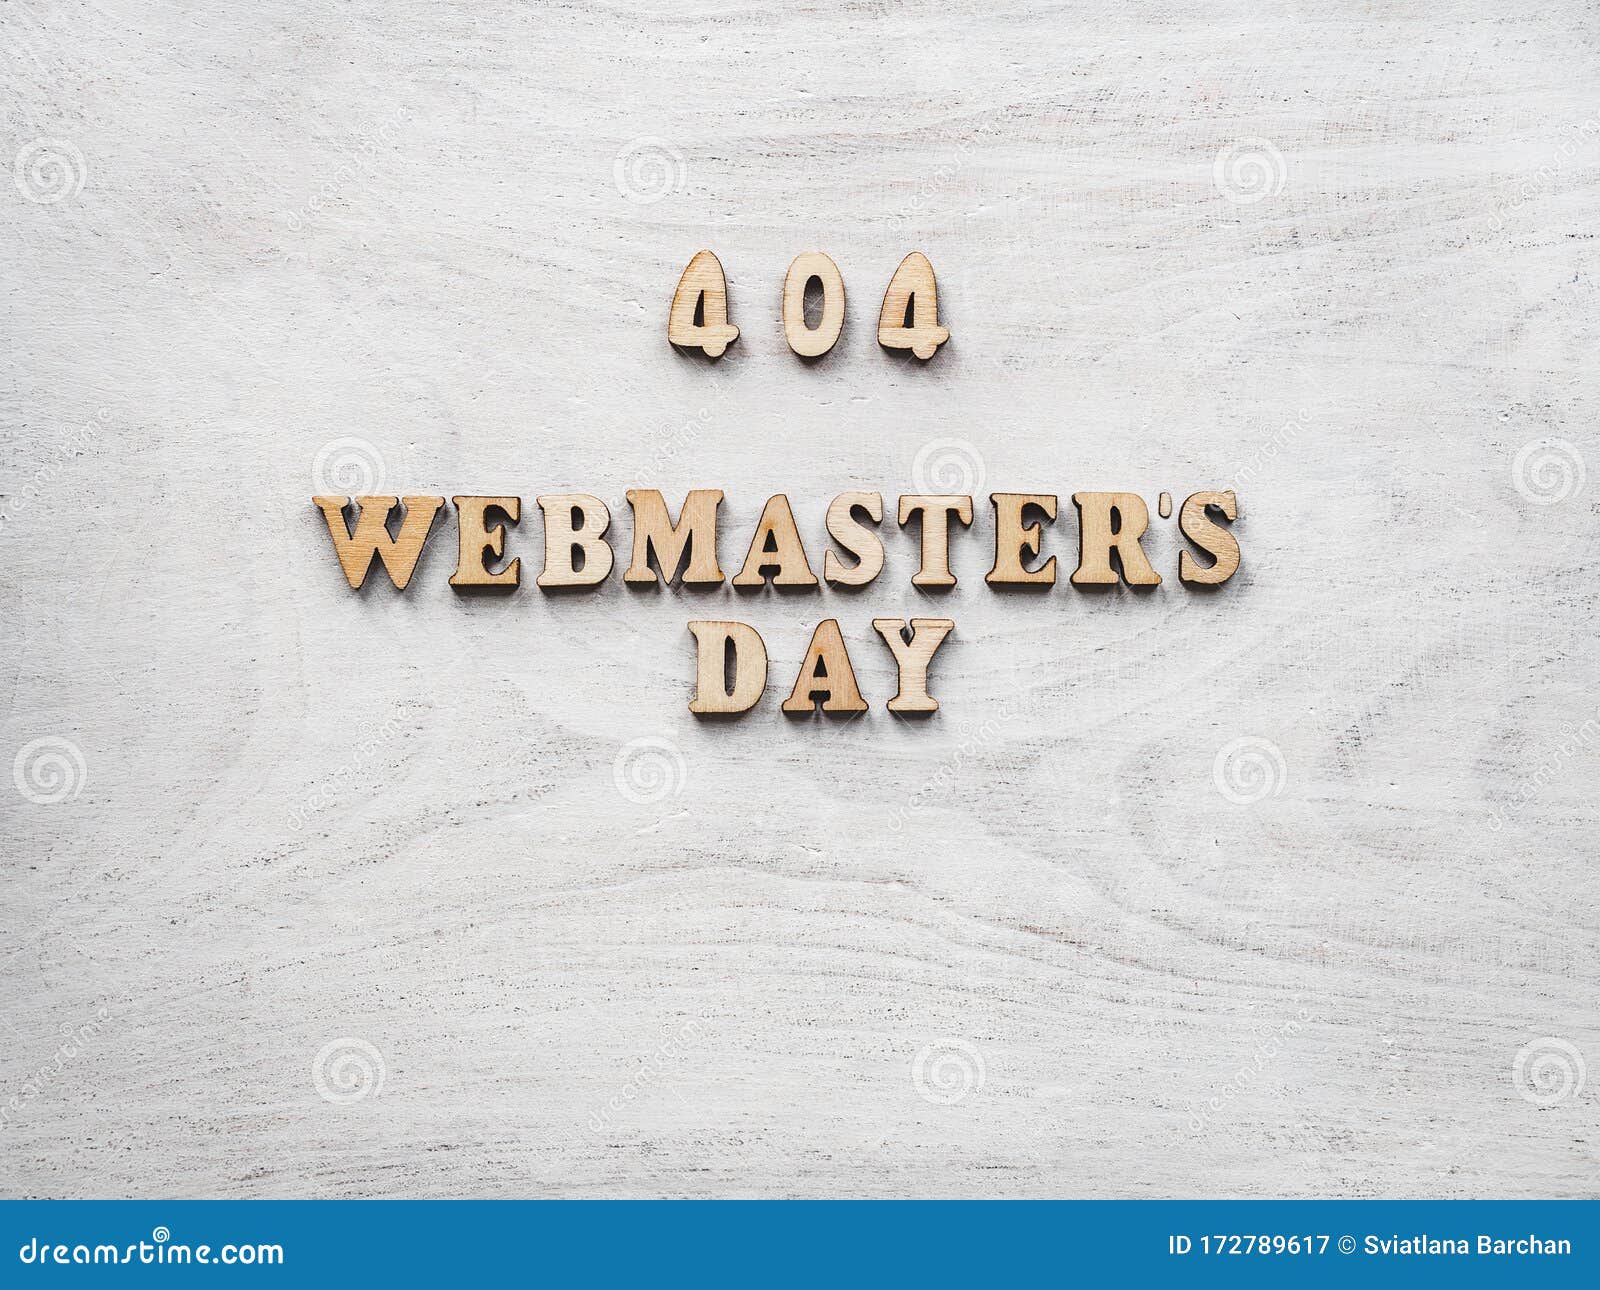 webmaster day greeting card. close-up, top view